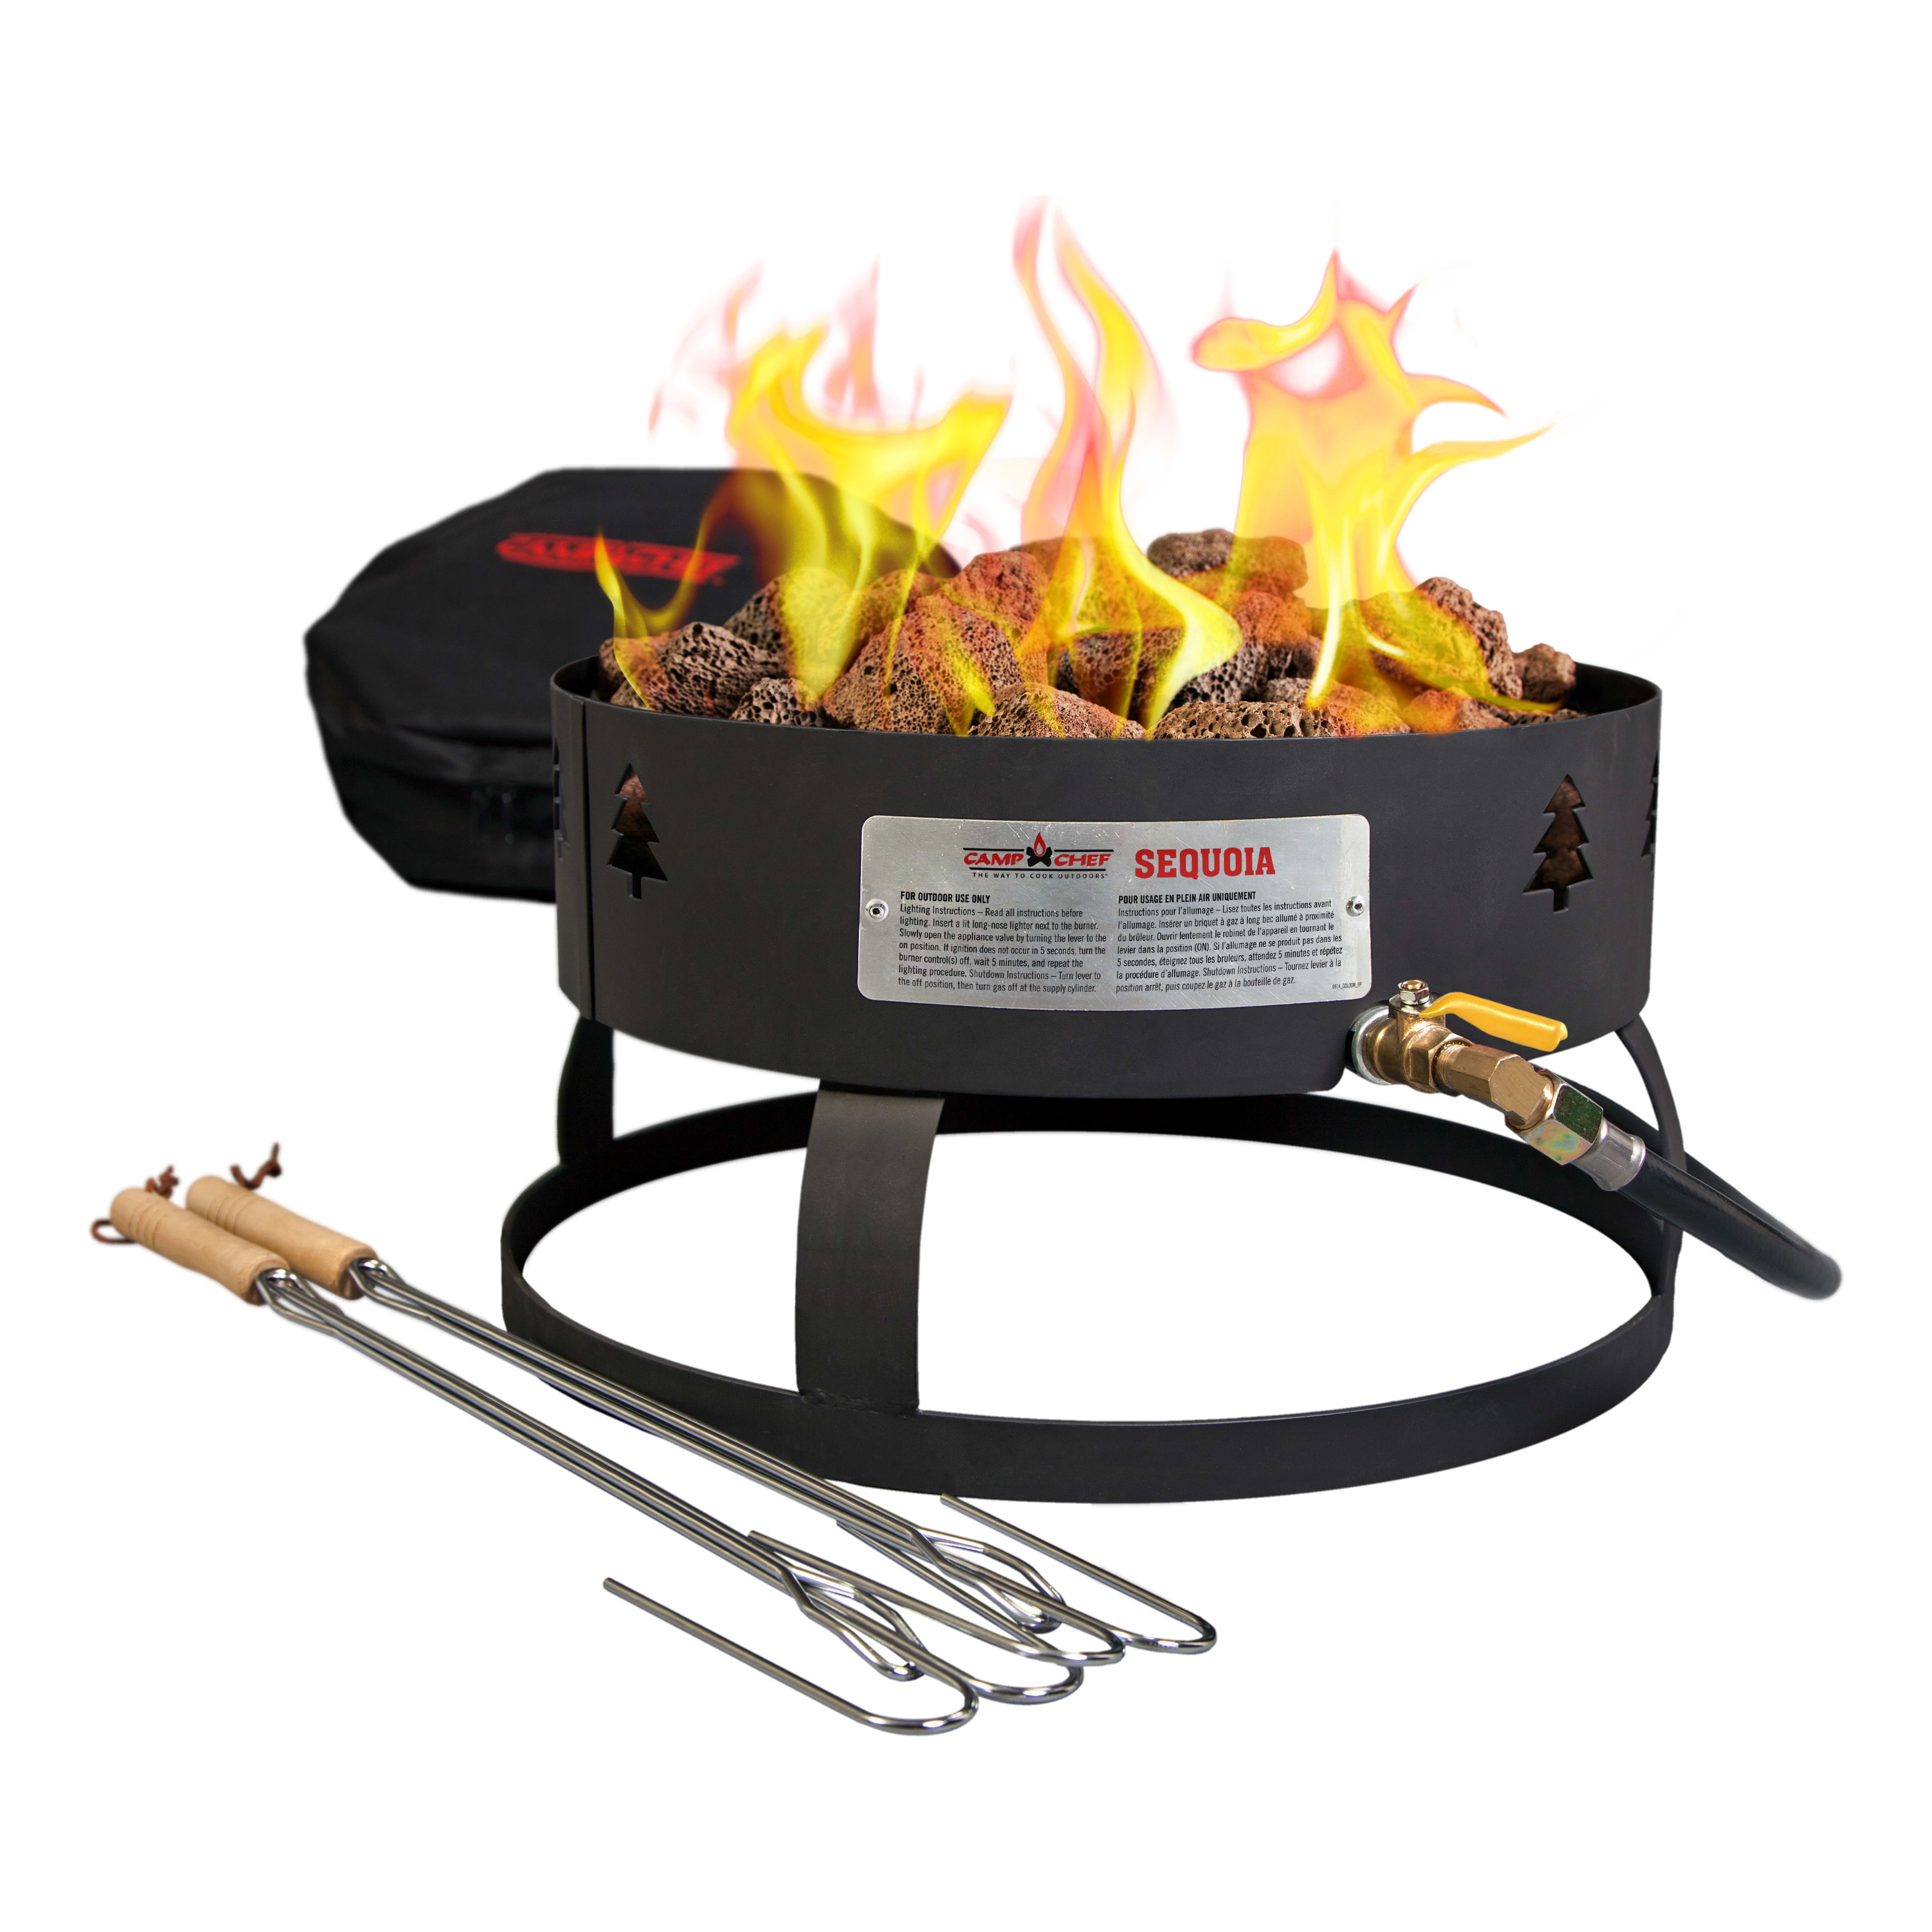 Camp Chef® Portable Sequoia Fire Pit